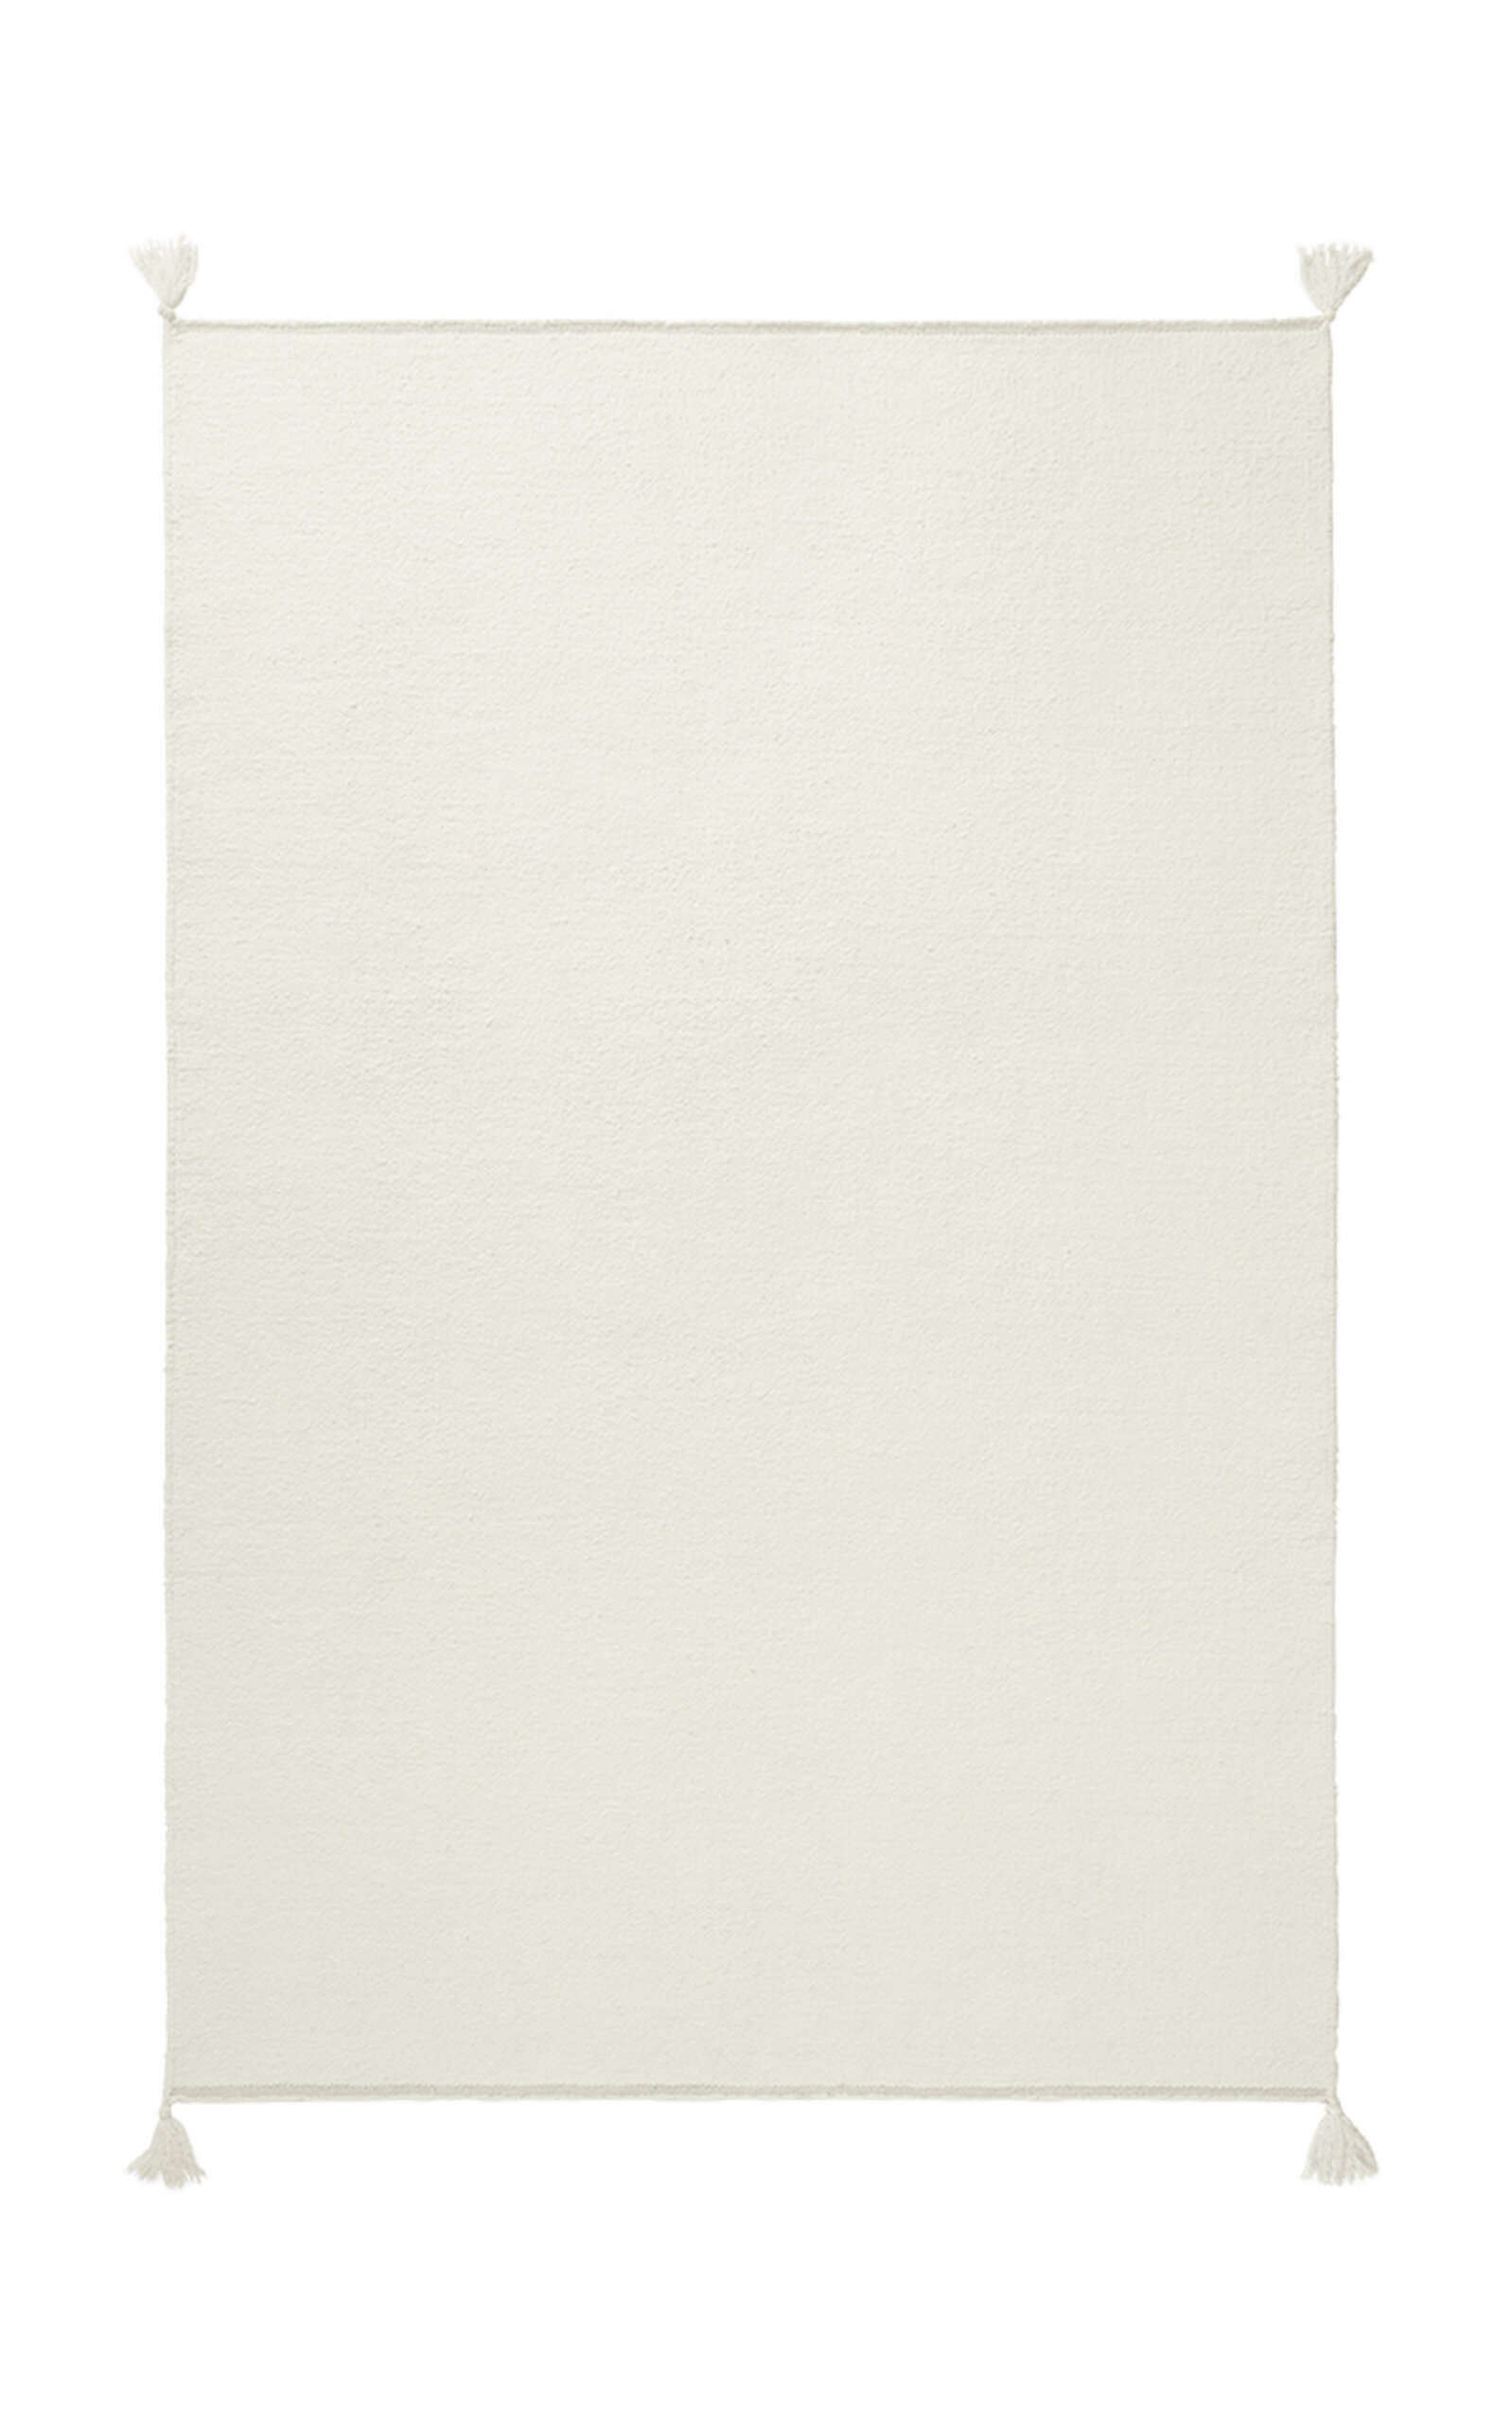 Nordic Knots Merino By ; Flatweave Area Rug In Natural White; Size 6' X 9' In Off-white